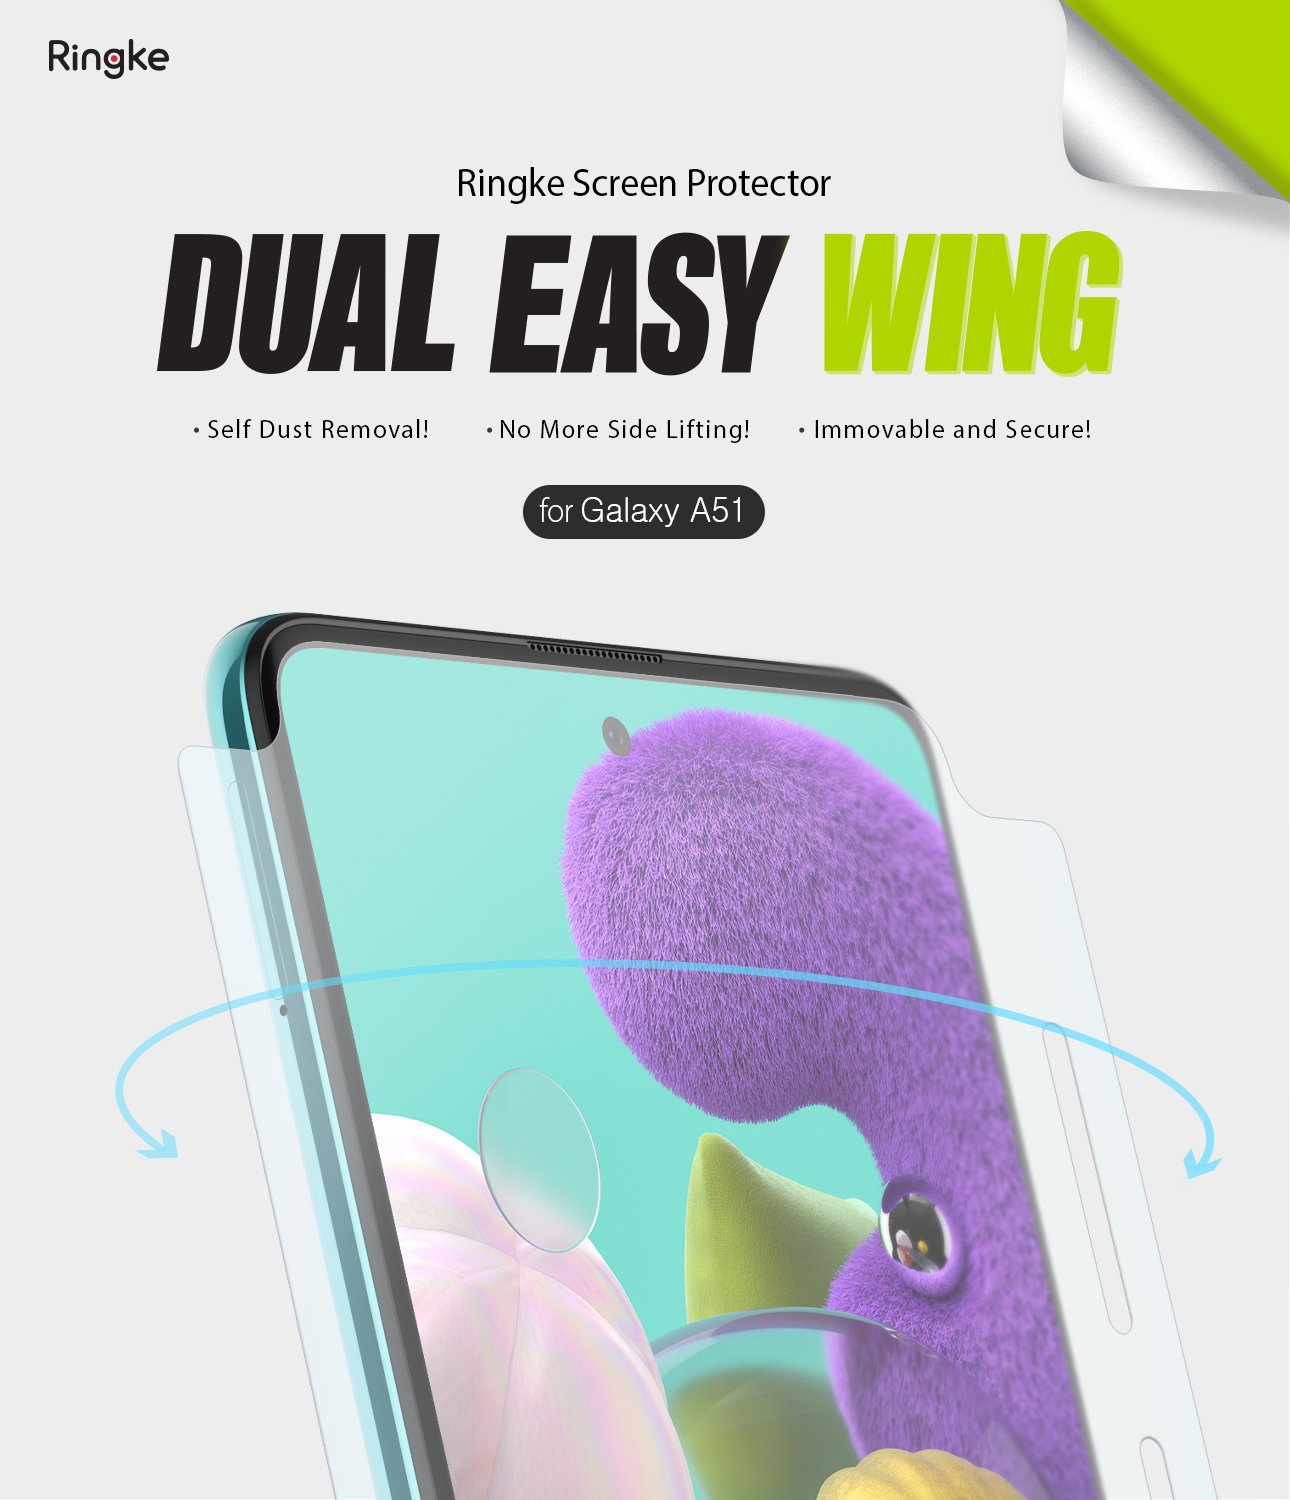 Galaxy A51 [Dual Easy Film Wing] Screen Protector [2 Pack]